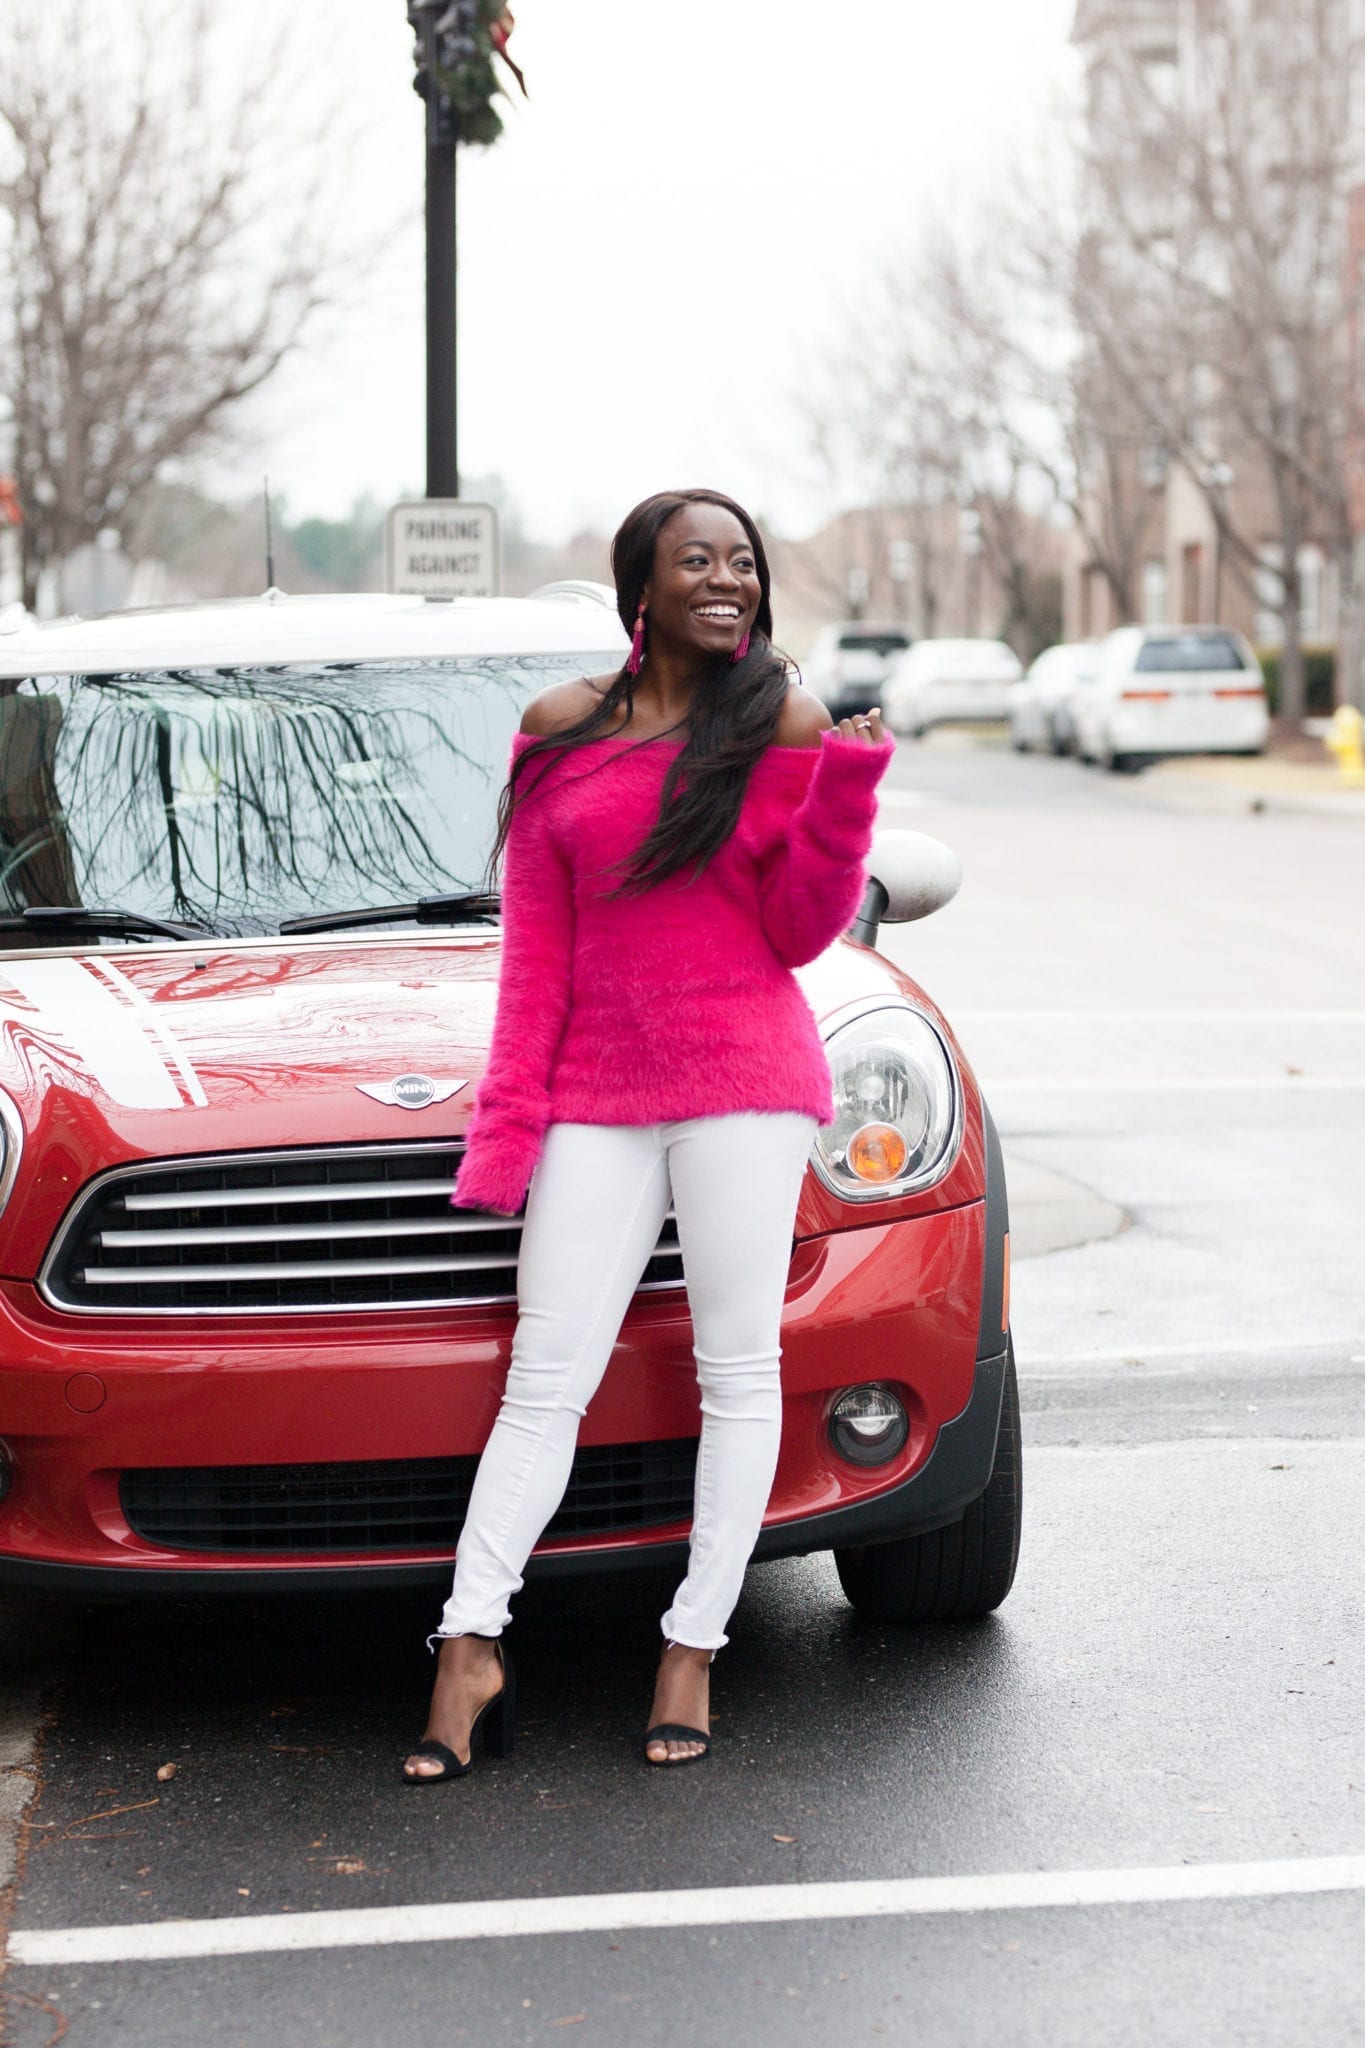 Hi! I'm Tomi. I'm a southern fashion and lifestyle blogger who loves color. Check out this fuzzy, pink sweater from the Loft! It's super soft and can be worn standard and off the shoulder. Check out the blog post to shop! GoodTomiCha.com